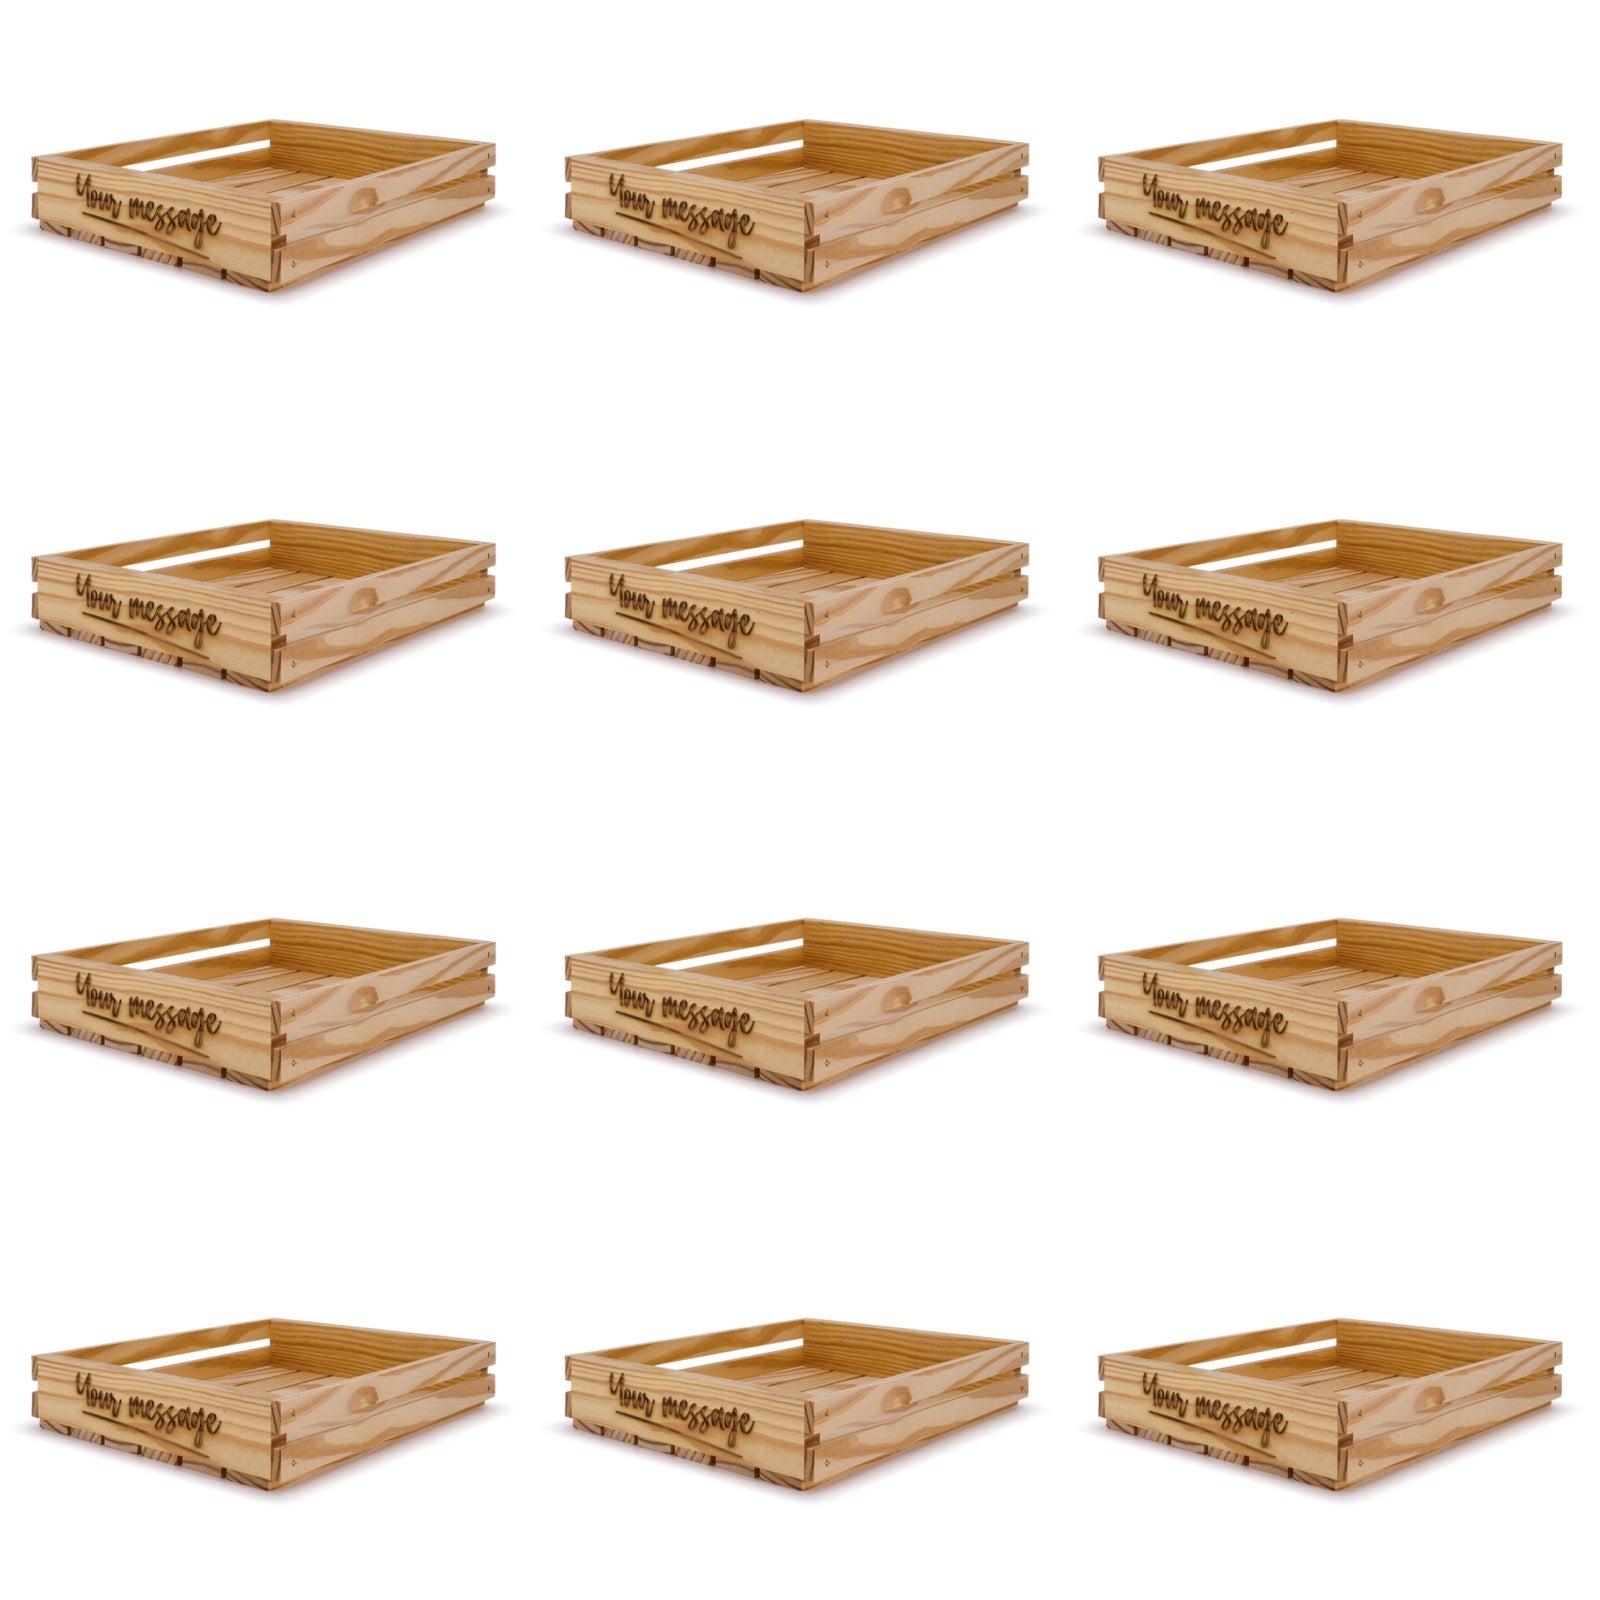 12 Small wooden crates 14x12x2.5 your message included